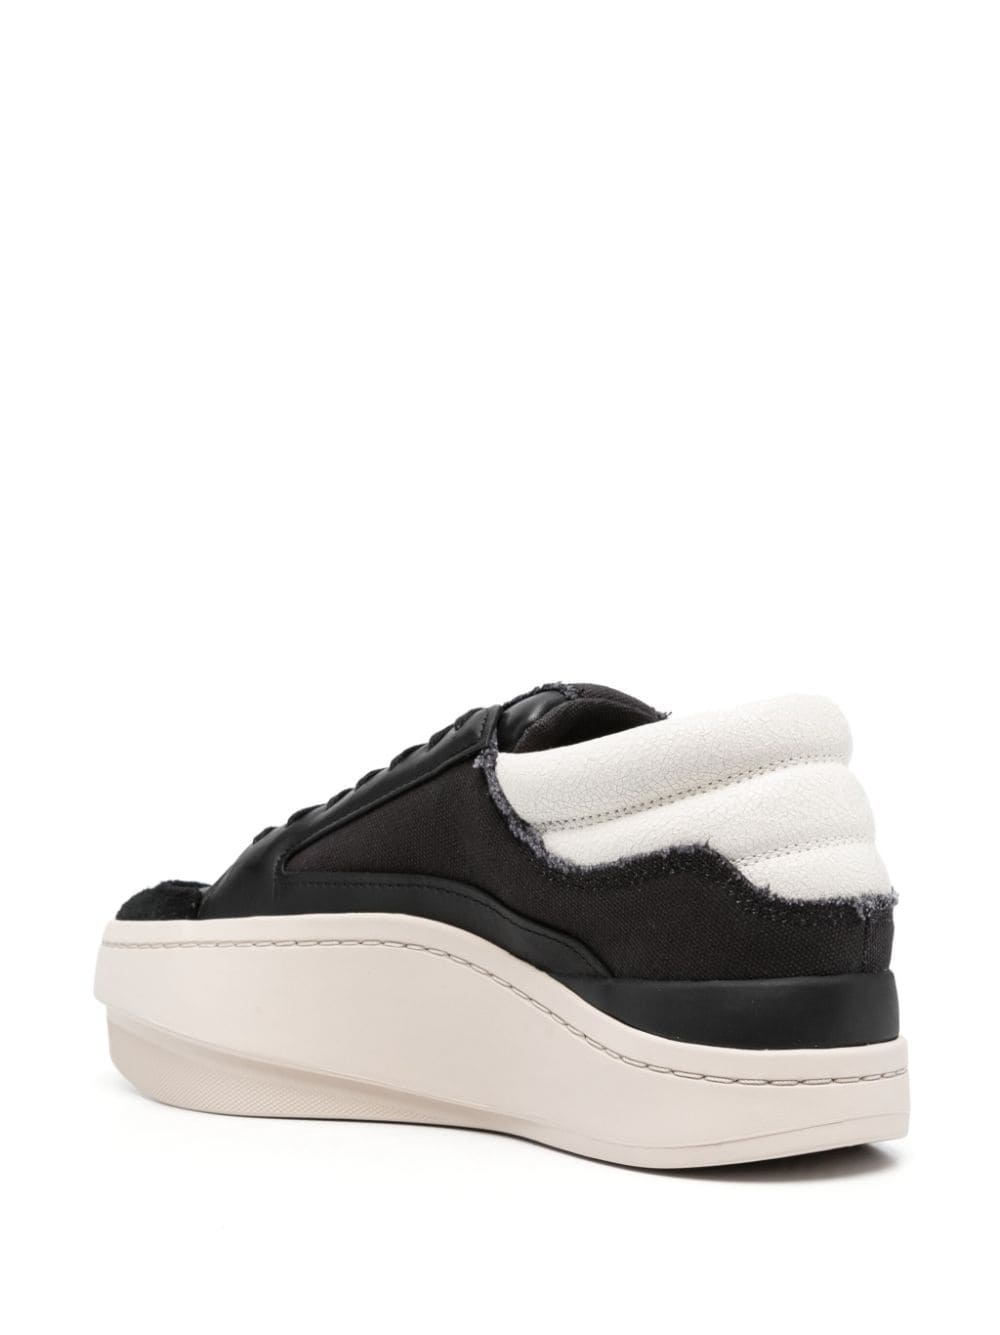 Centennial Lo leather sneakers - 3